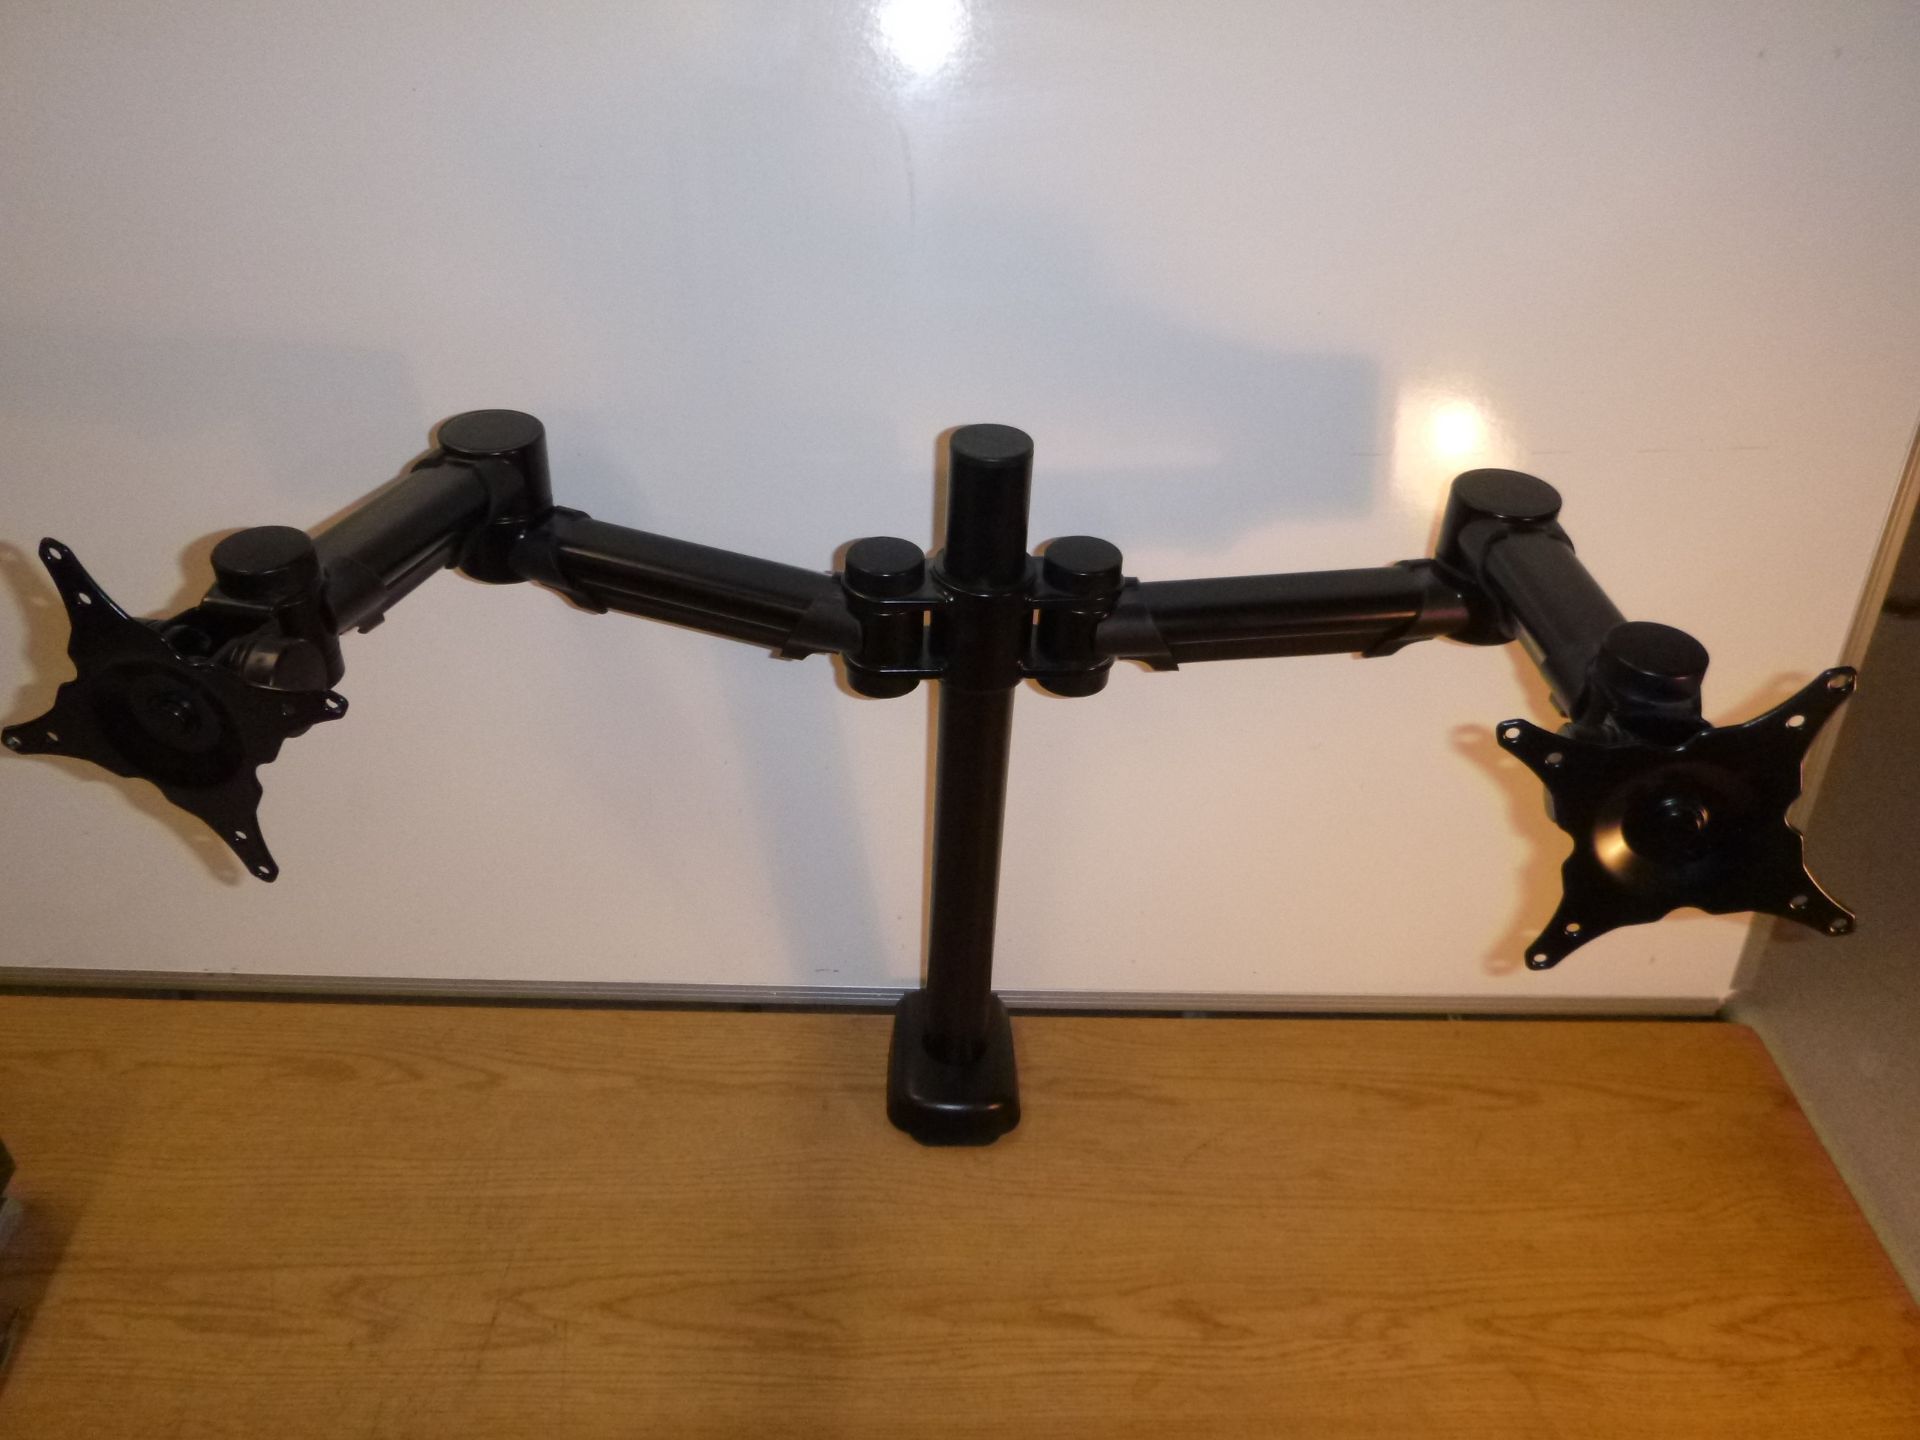 2 ARM MONITOR STAND. VERY SUBSTANTIAL METAL CONSTRUCTION. MULTI ADJUSTABLE. DESKTOP, SHELF OR - Image 2 of 4